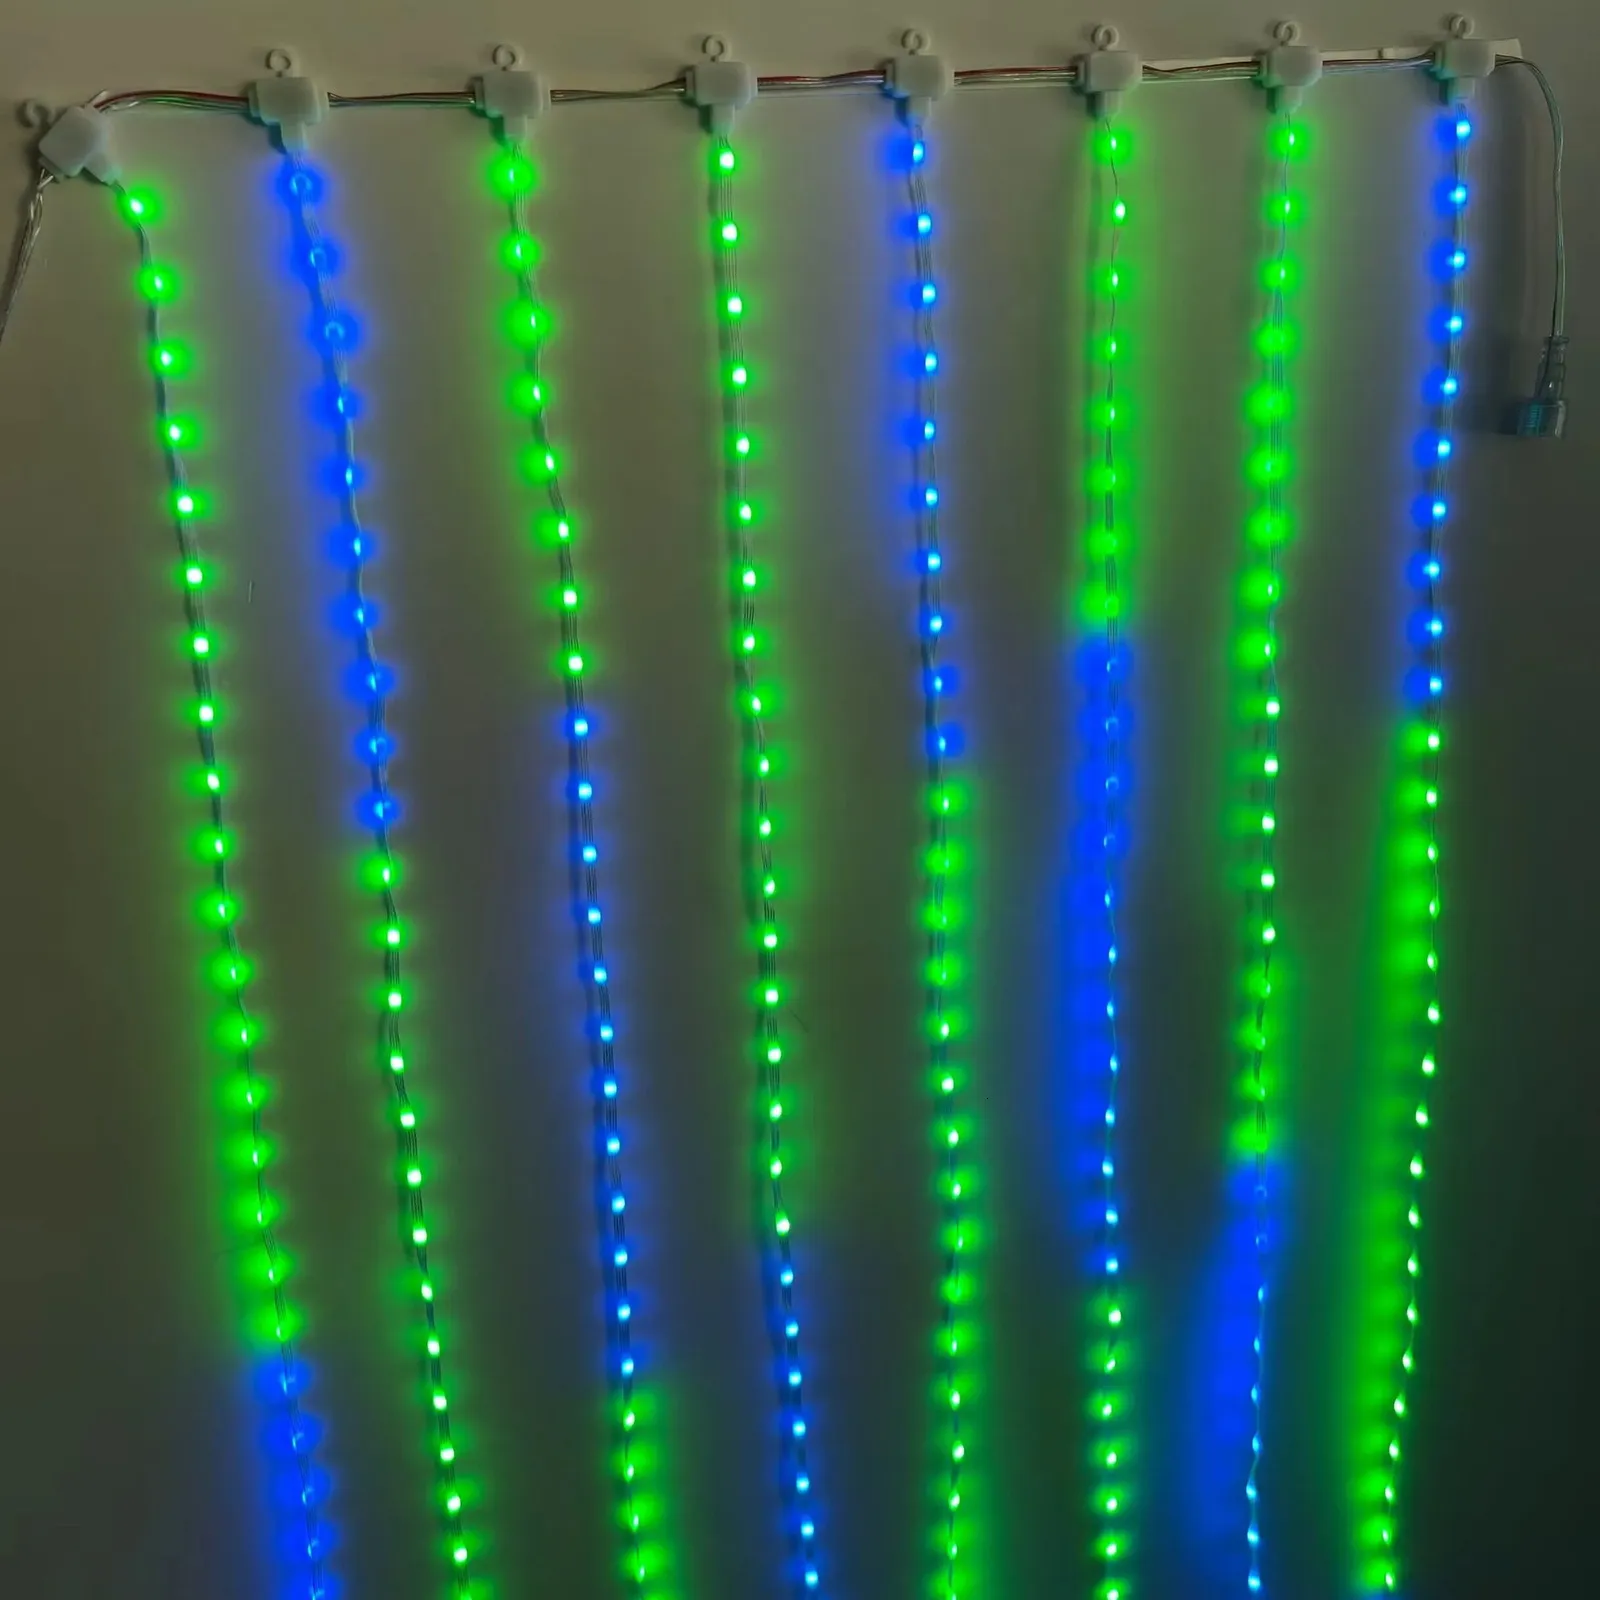 Other Event Party Supplies DC5V 12V 30mm Pitch Addressable RGB Smart LED PebbleSeed Matrix Curtain Lights 100LEDs Long by 10 Clusters IP67 231019